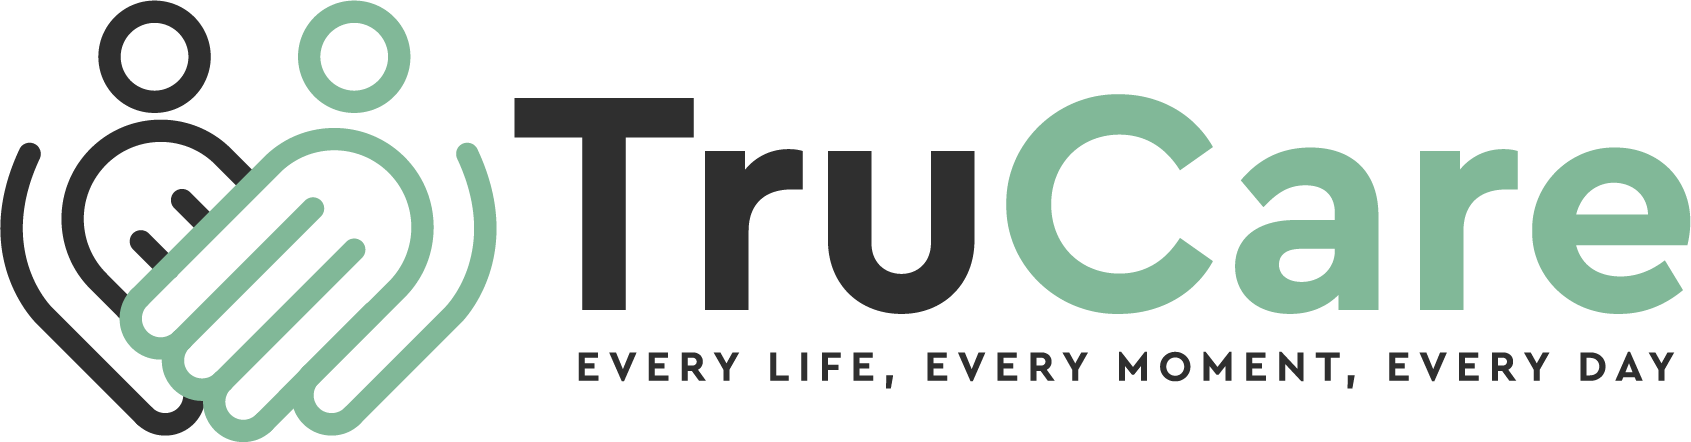 A green banner with the word truce written in black.